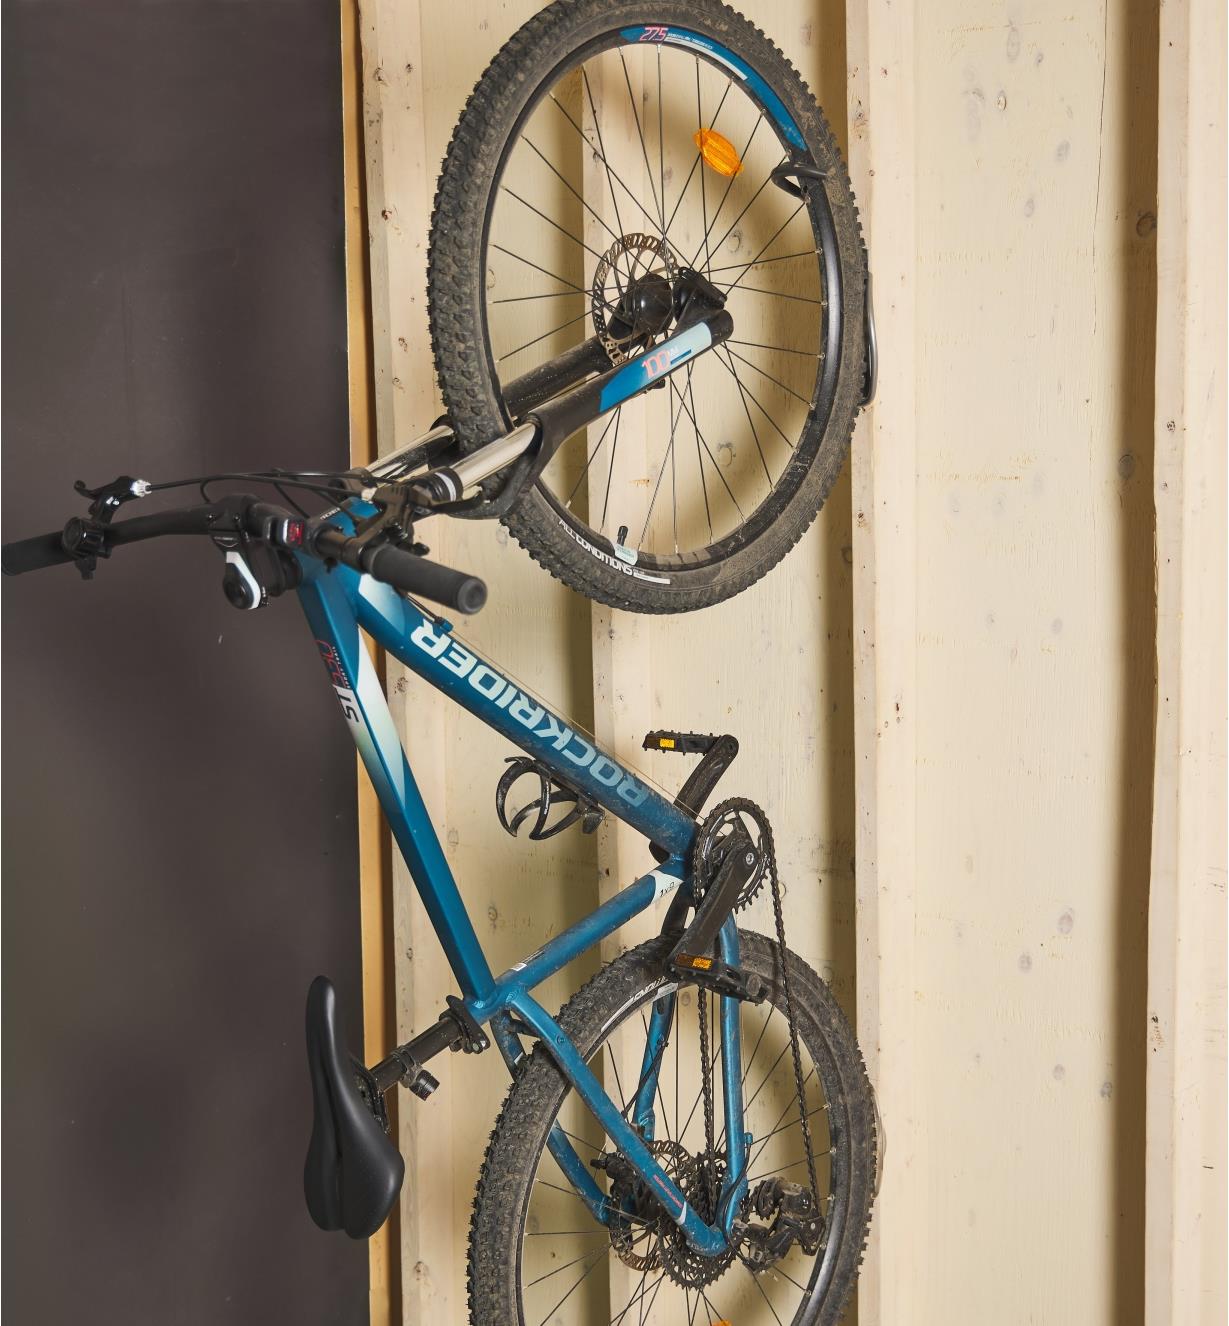 A bicycle suspended vertically against a wall on a bicycle rack